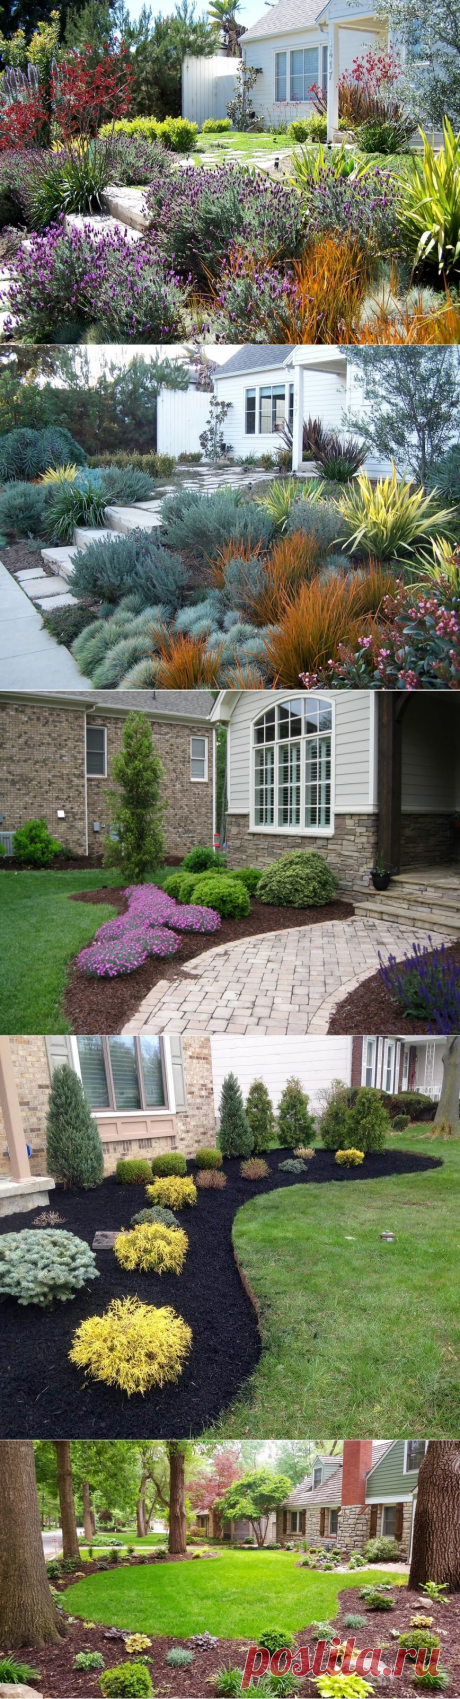 34+ Simple But Effective Front Yard Landscaping Ideas on a Budget